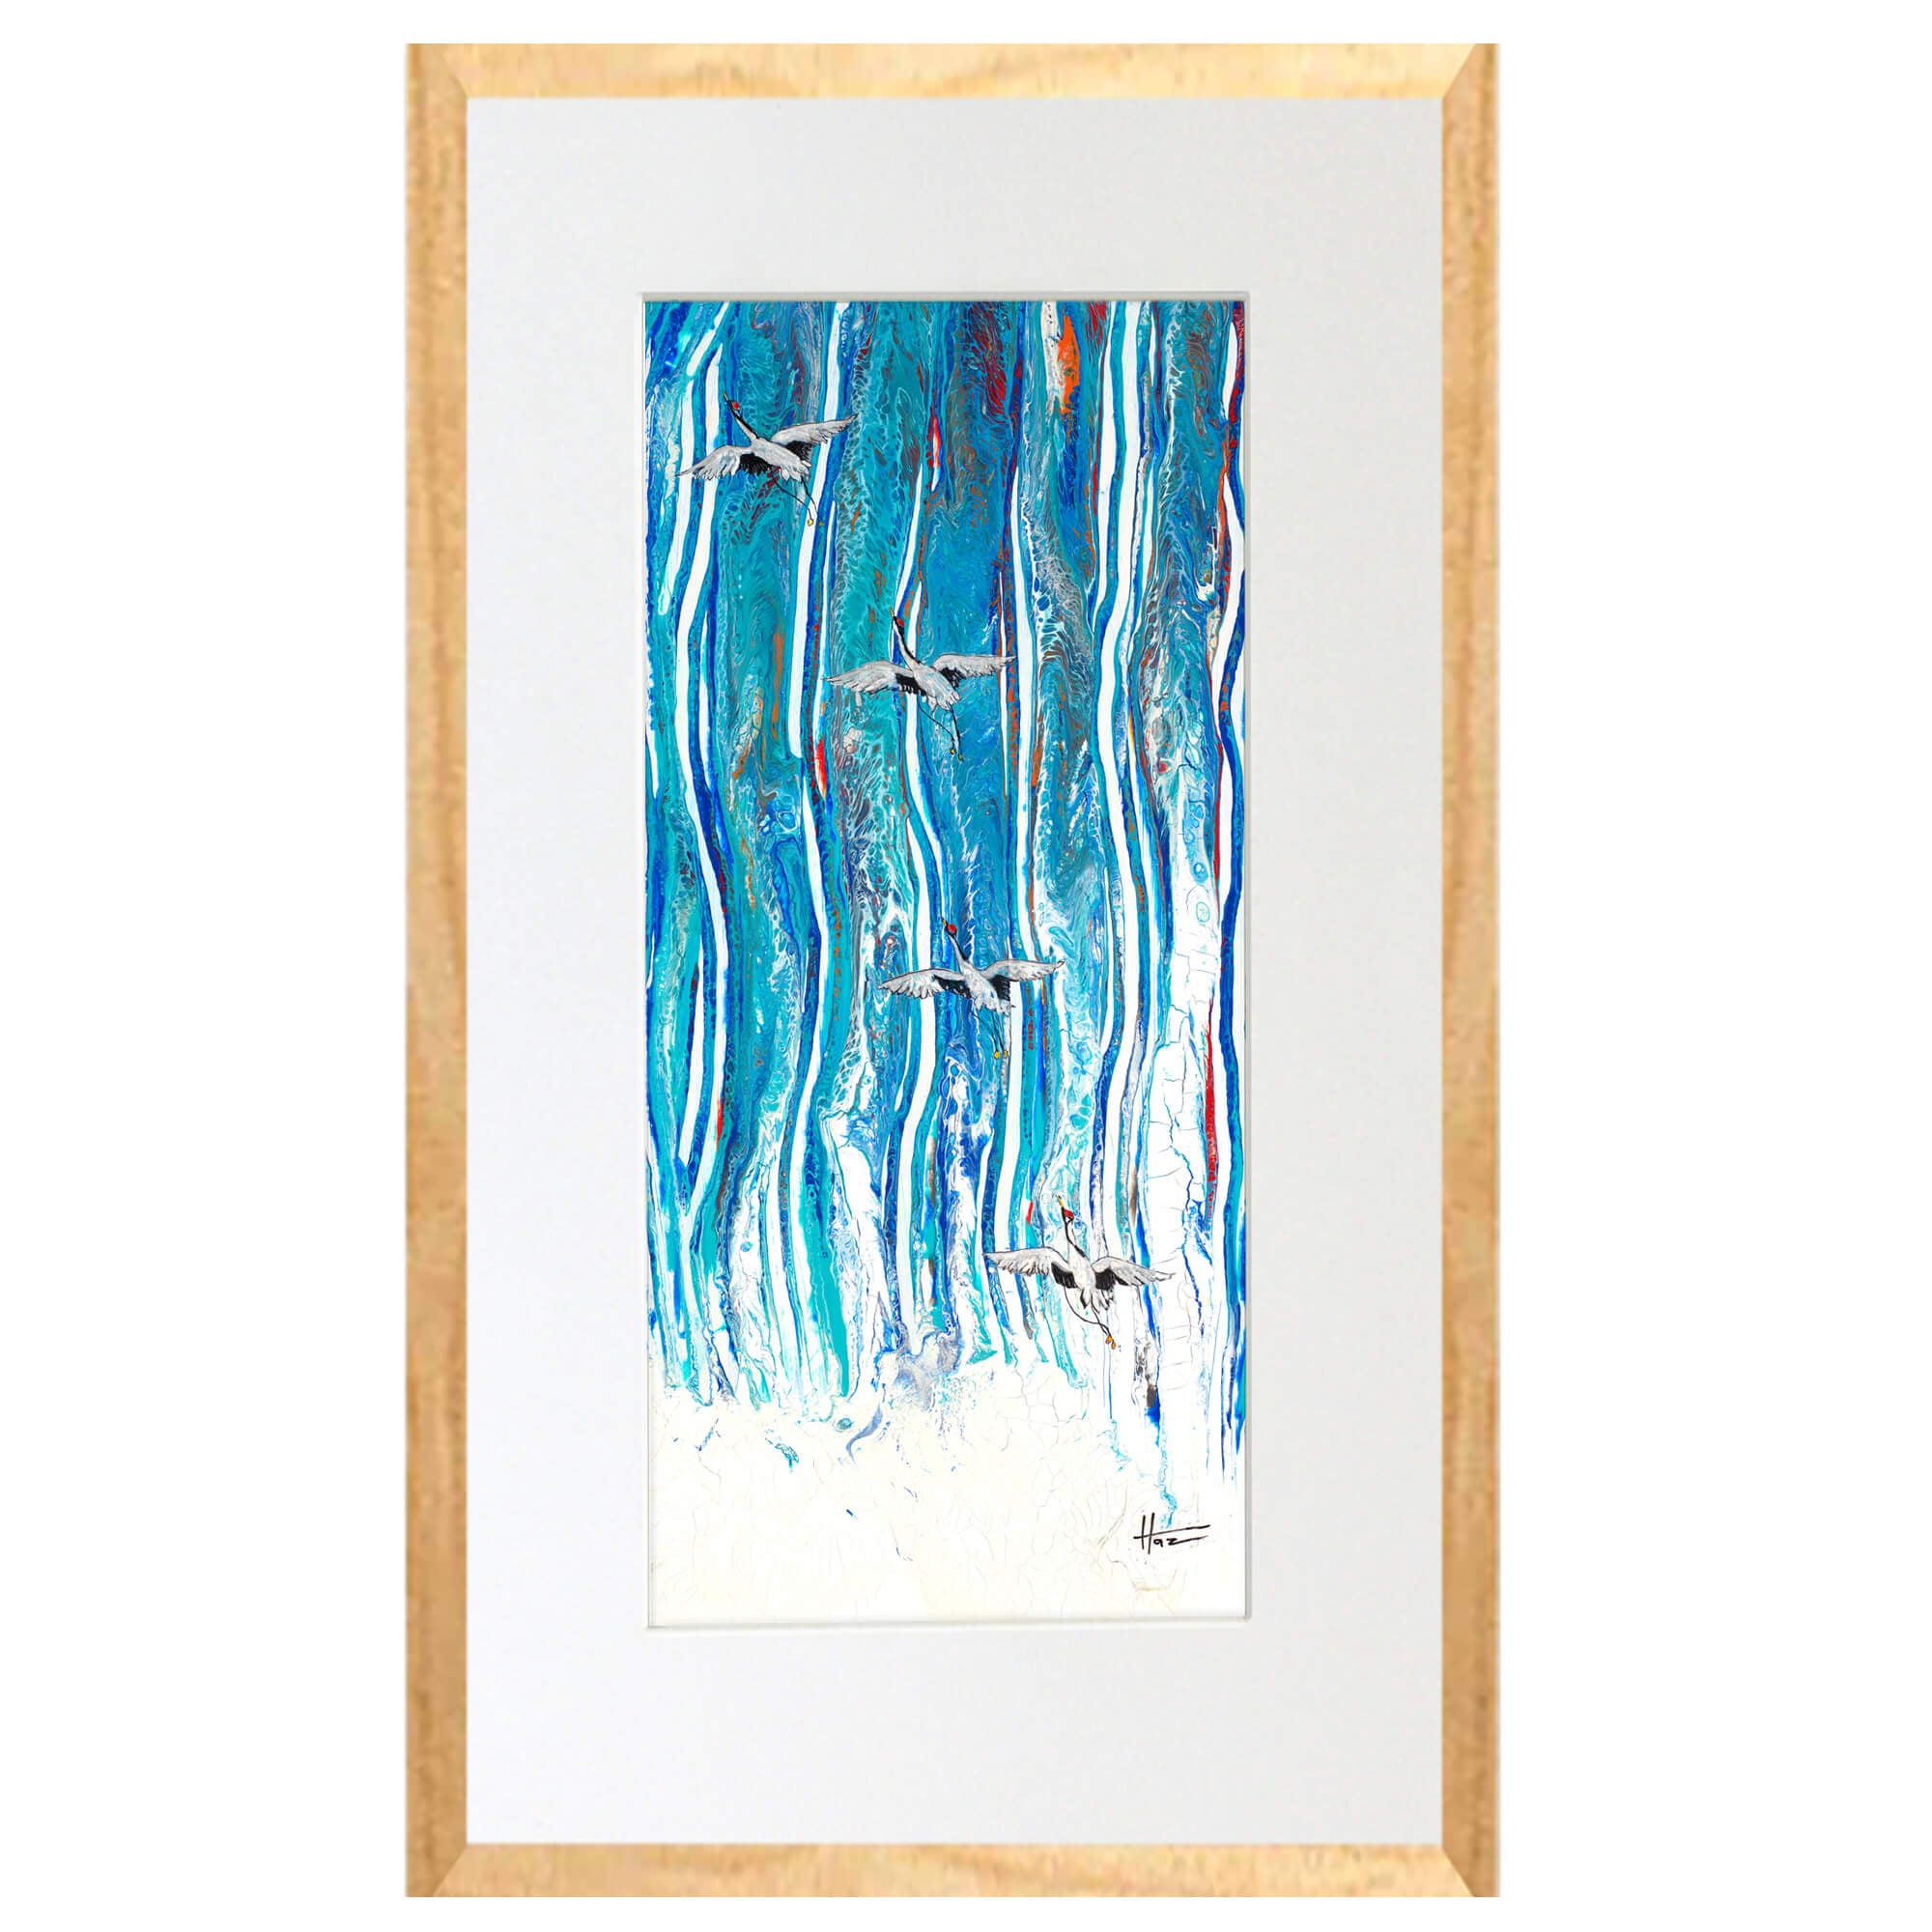 Matted art print with wood frame showcasing a crane in mid-air by hawaii artist Robert Hazzard